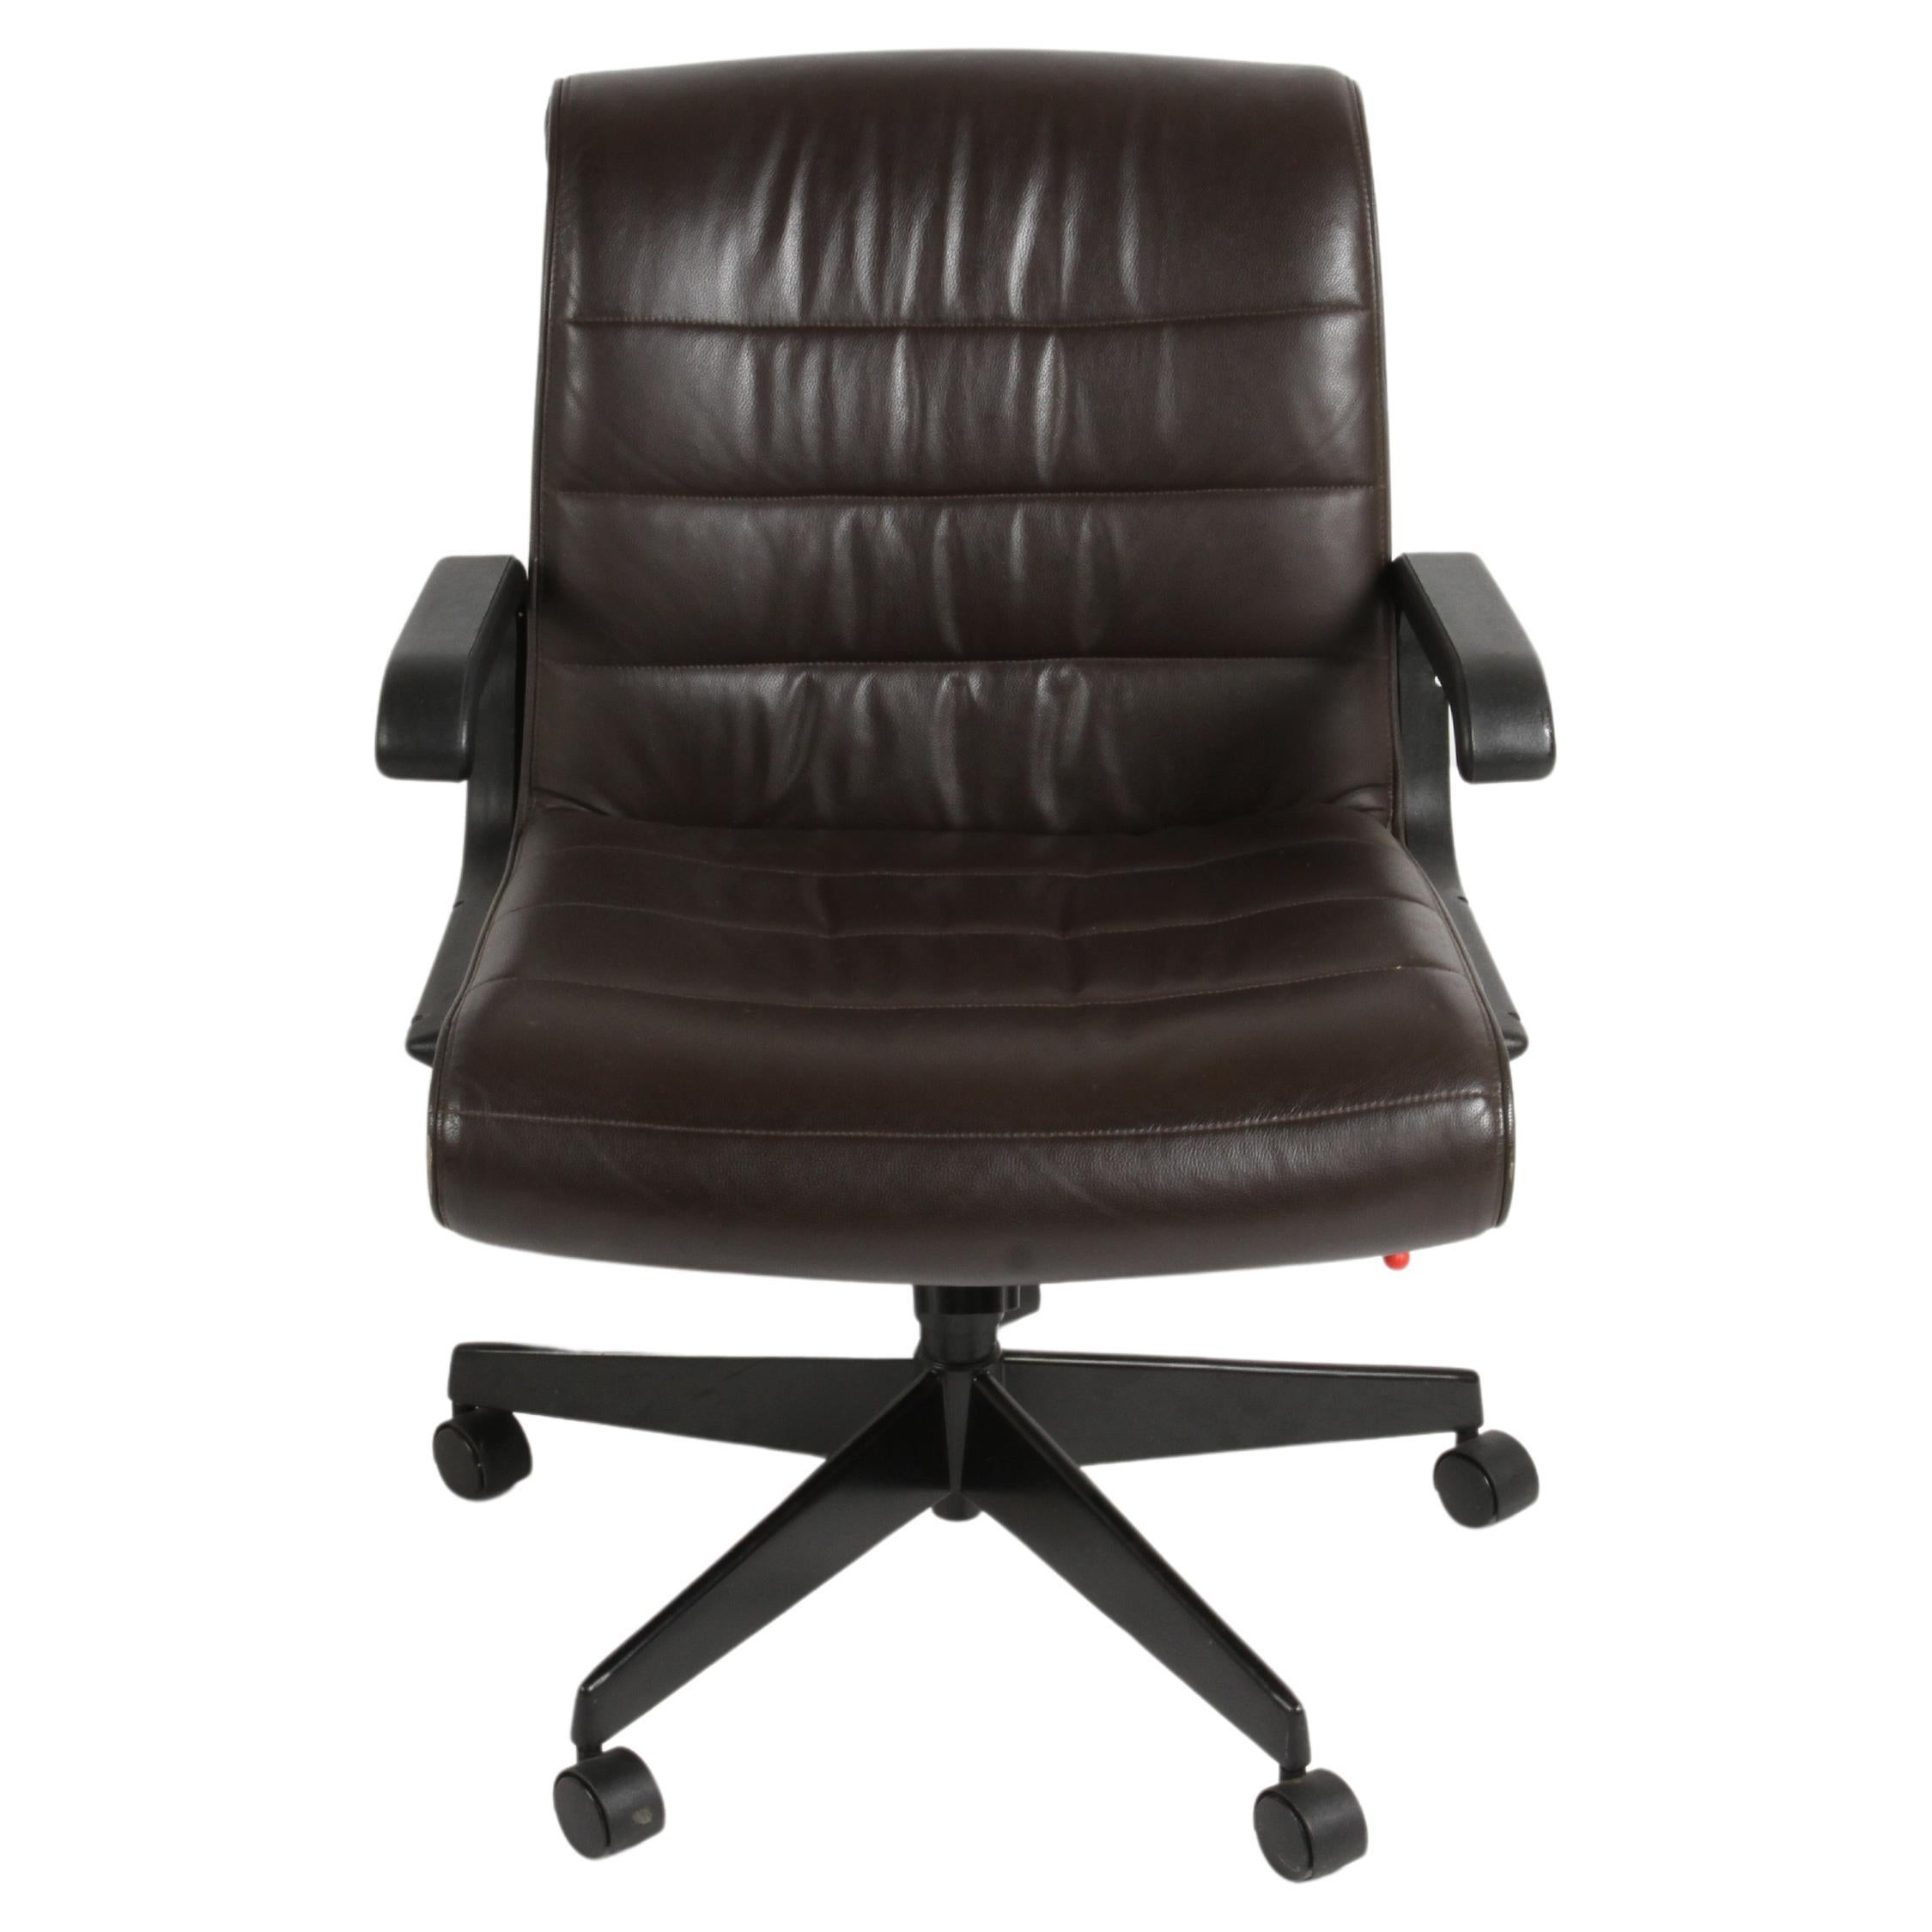 Richard Sapper for Knoll Desk Task Executive or Conference Chair - Brown Leather